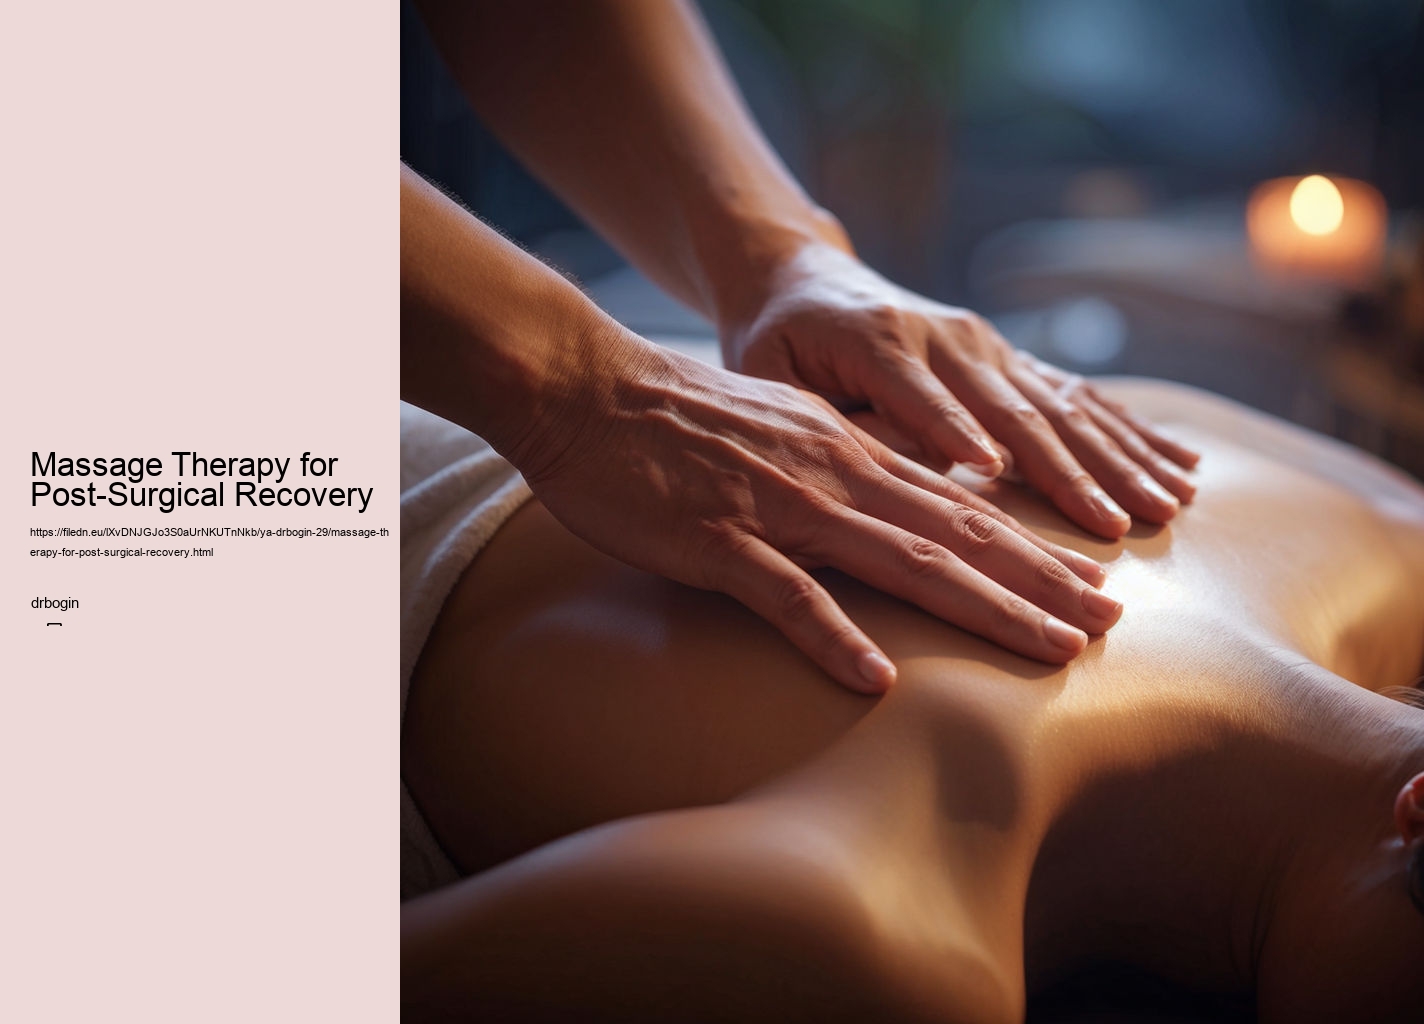 Massage Therapy for Post-Surgical Recovery